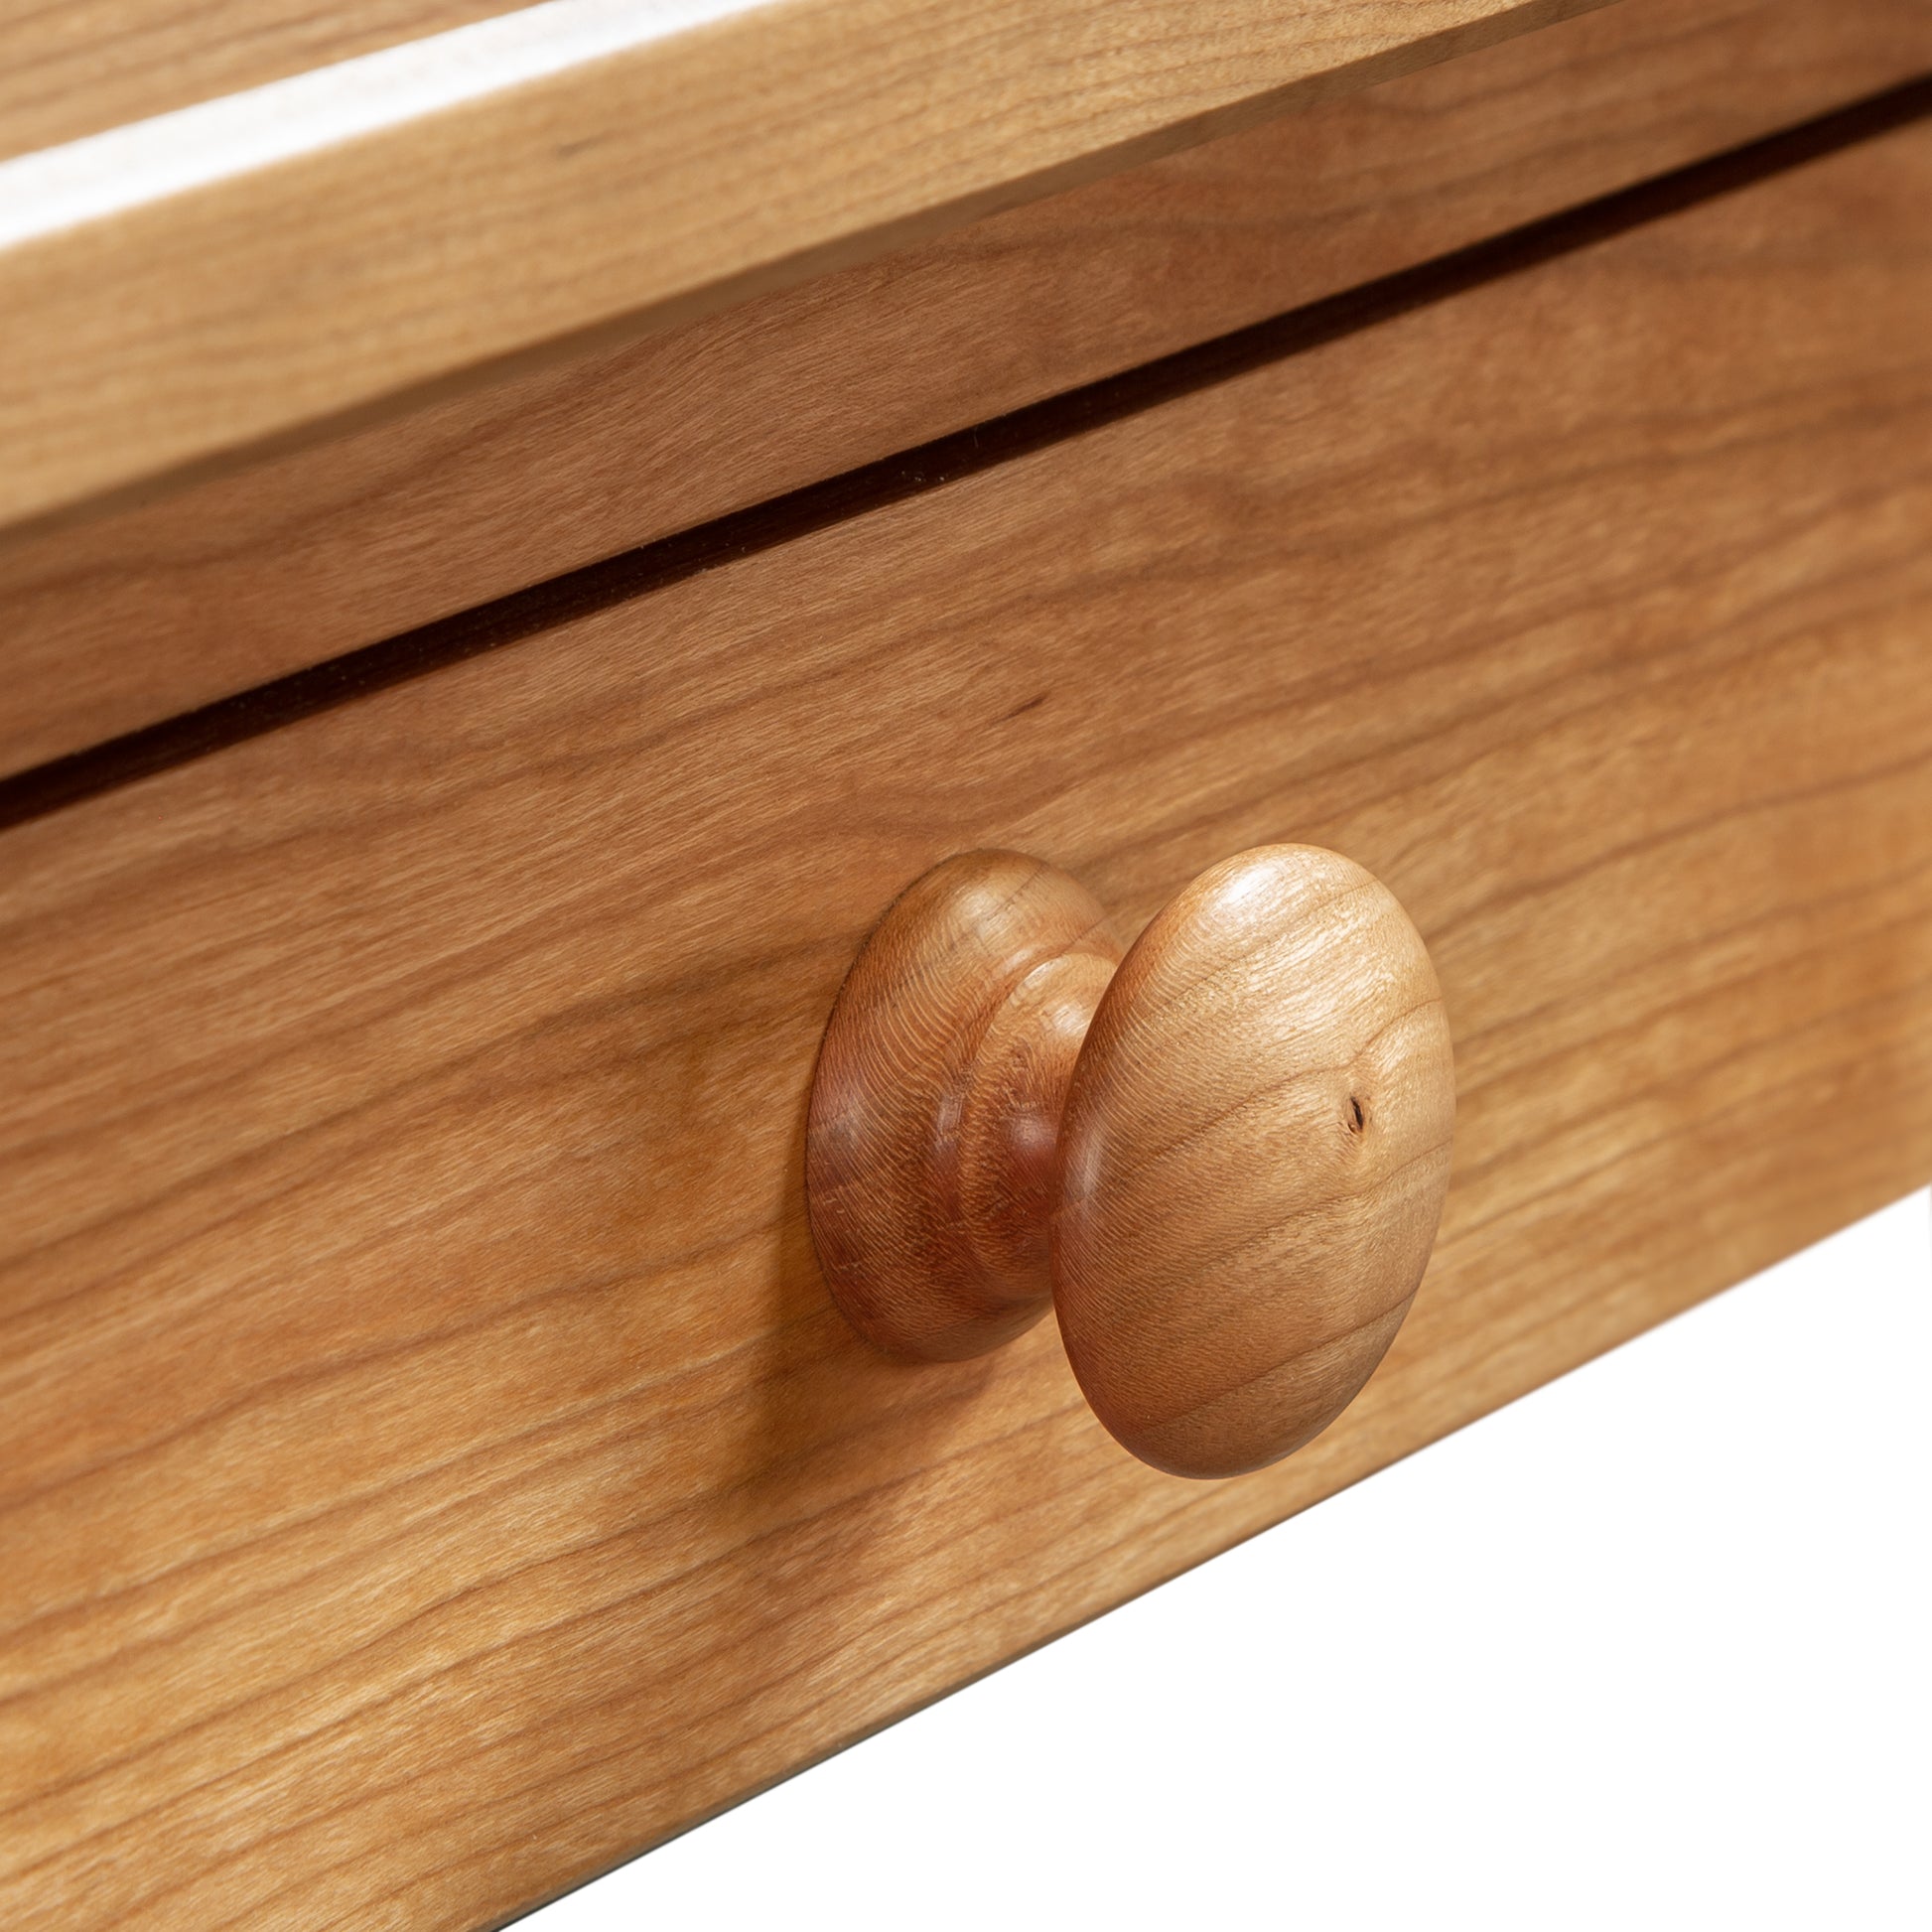 A close up of a Vermont Shaker Writing Desk with a knob made by Maple Corner Woodworks.